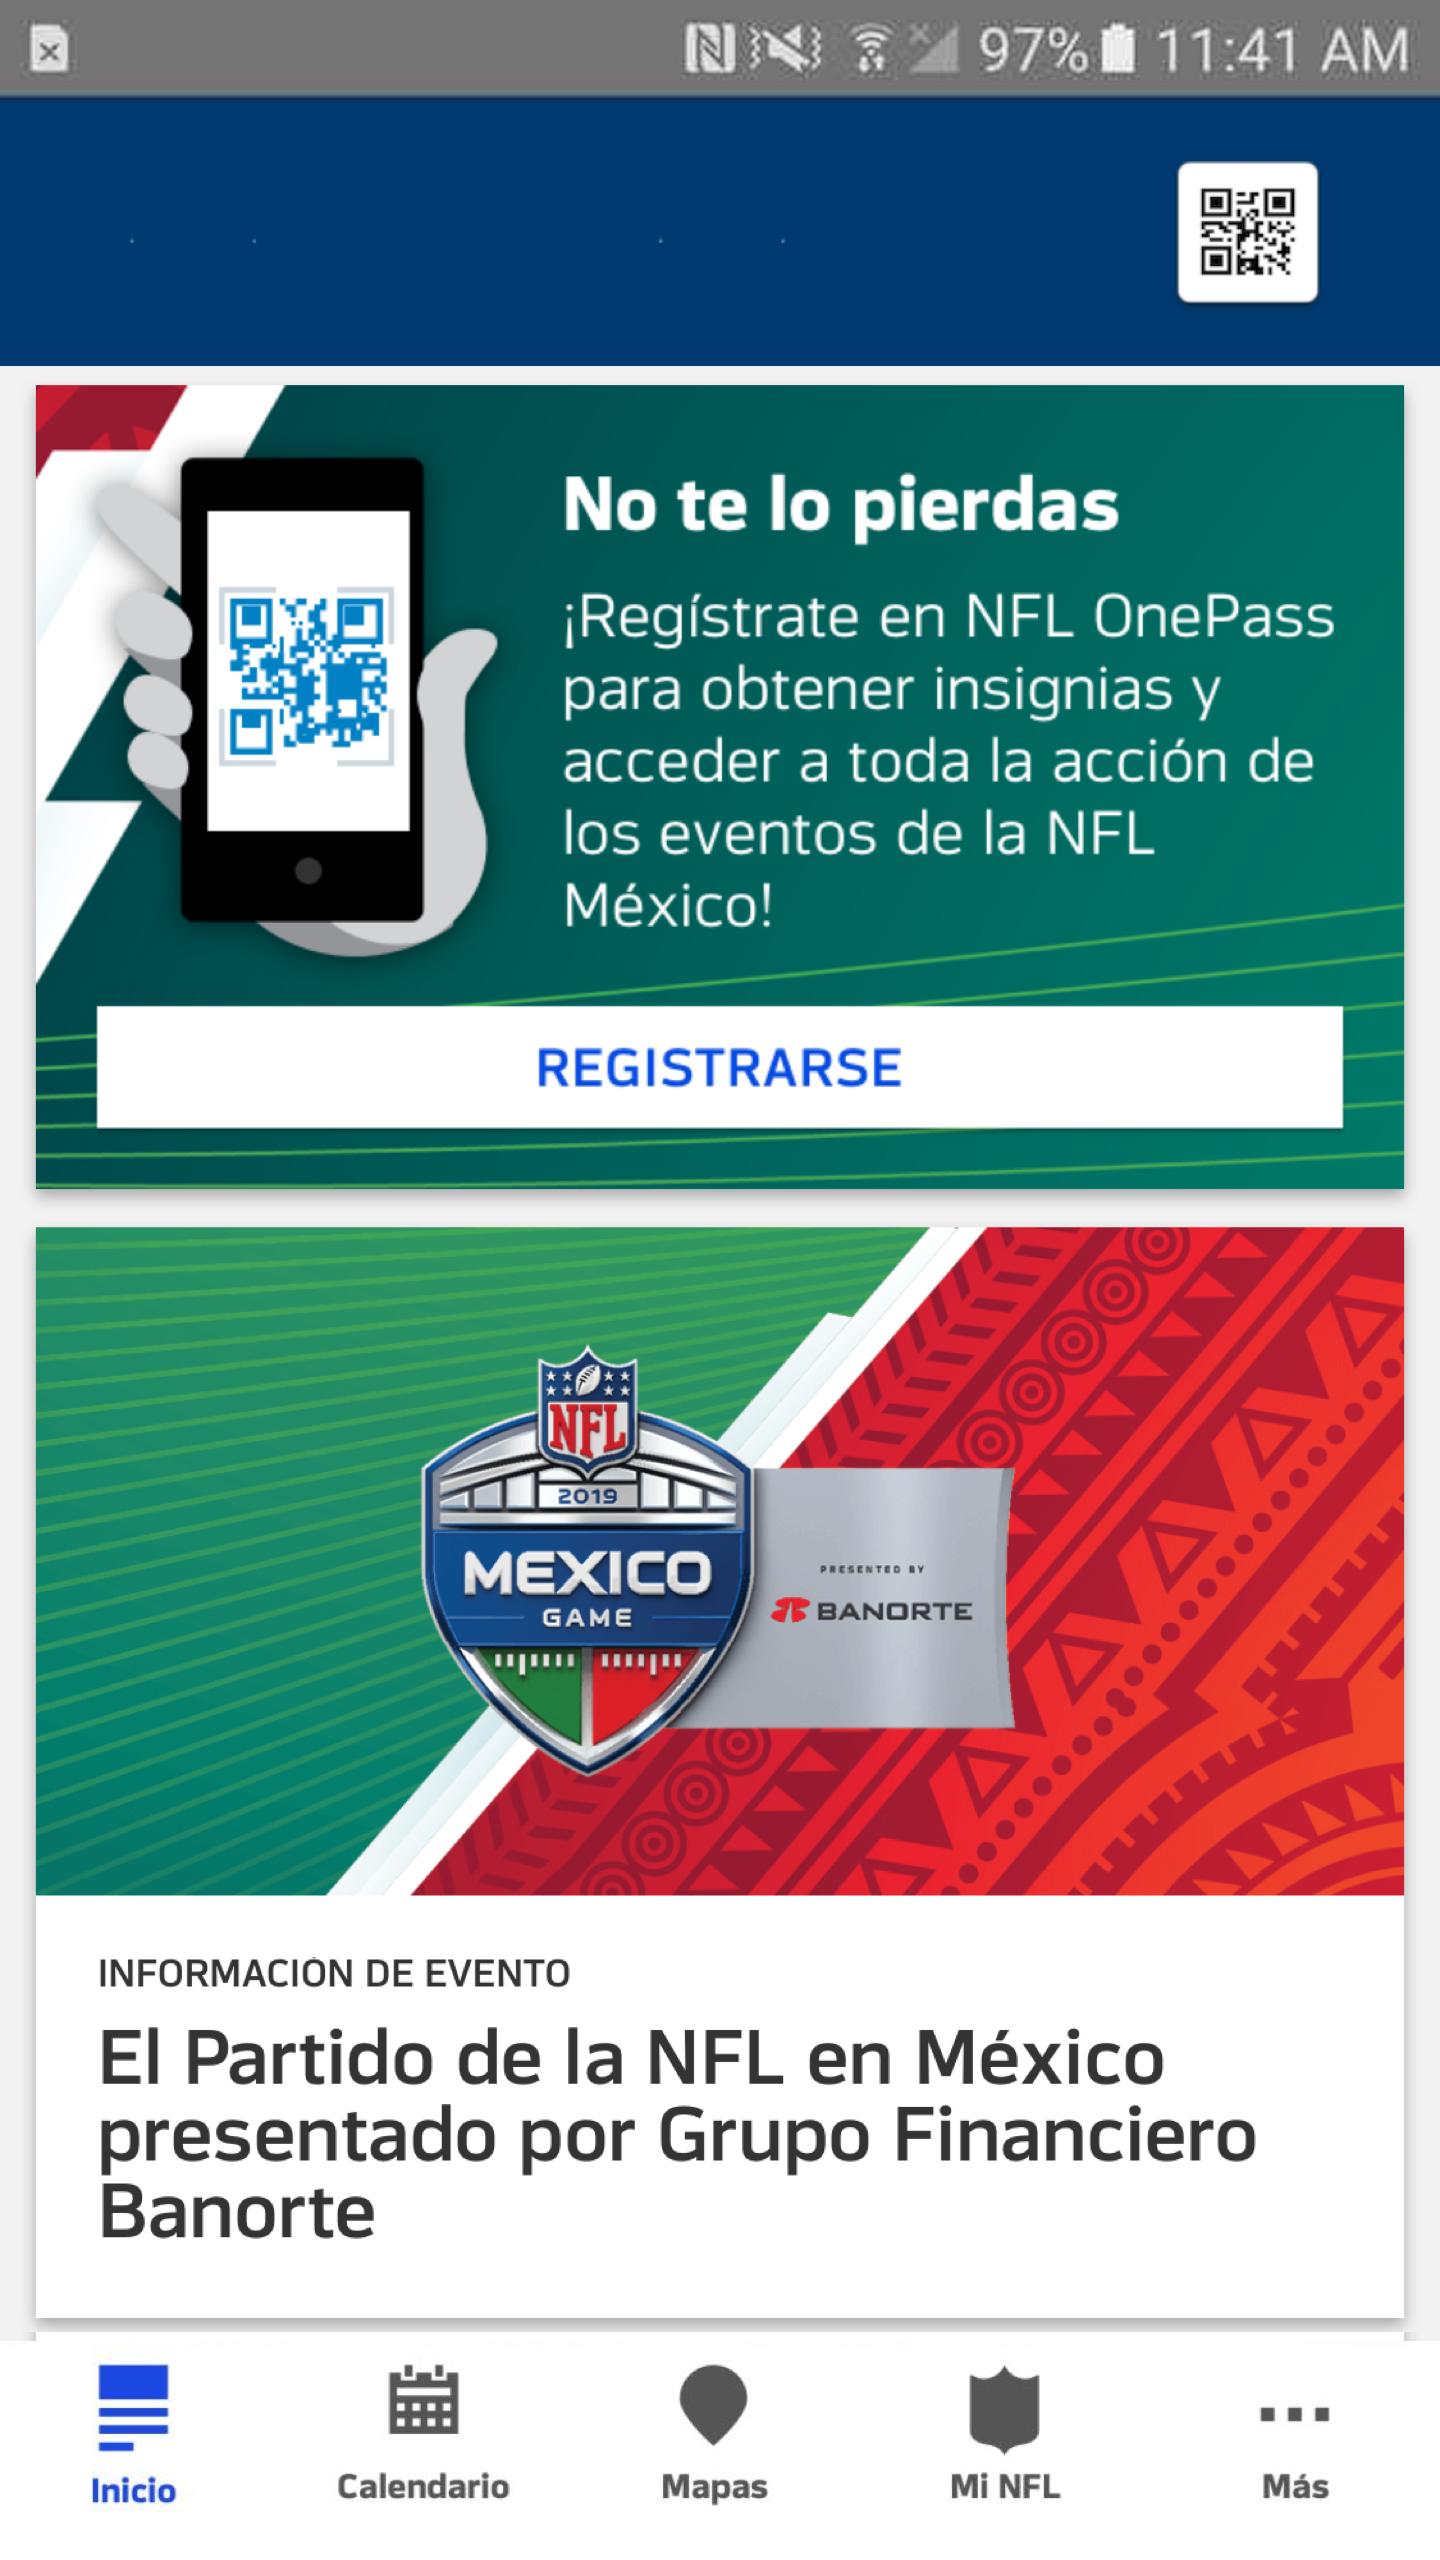 Nfl Mexico Onepass For Android Apk Download - evento de roblox zombie rush